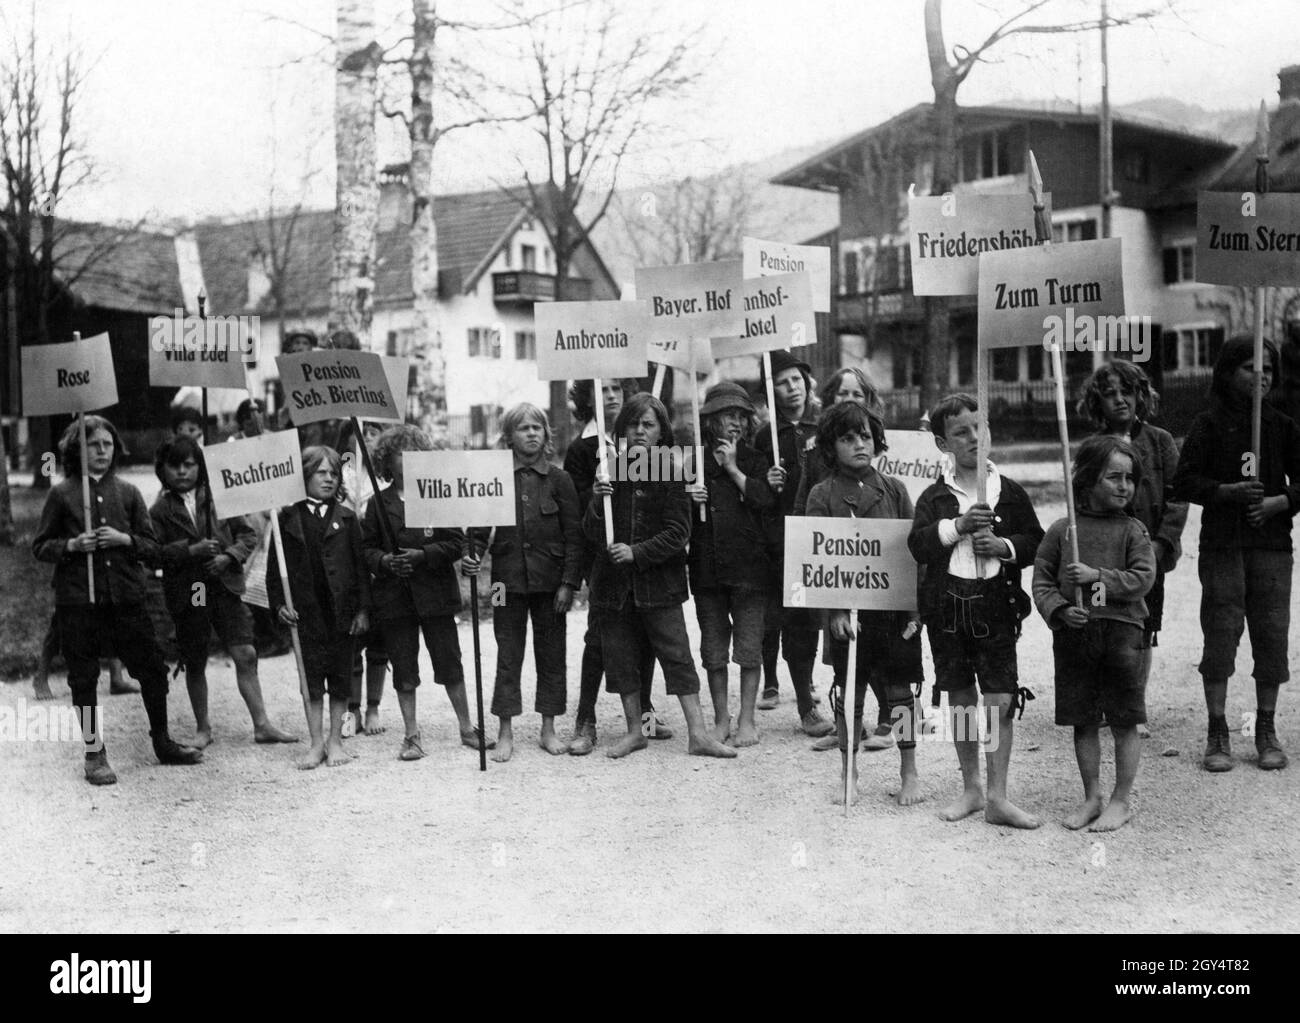 The guests arriving for the Passion Play in May and June 1922 were welcomed by a crowd of children. Each child carries a sign of an accommodation in Oberammergau to take the guests there. The accommodations include (from left to right): Rose, Villa Edel, Bachfranzl, Pension Seb. Bierling, Villa Krach, Ambronia, Bayer. Hof, Pension Edelweiss, Osterbichl, Friedenshöhe, Zum Turm, Zum Stern. [automated translation] Stock Photo